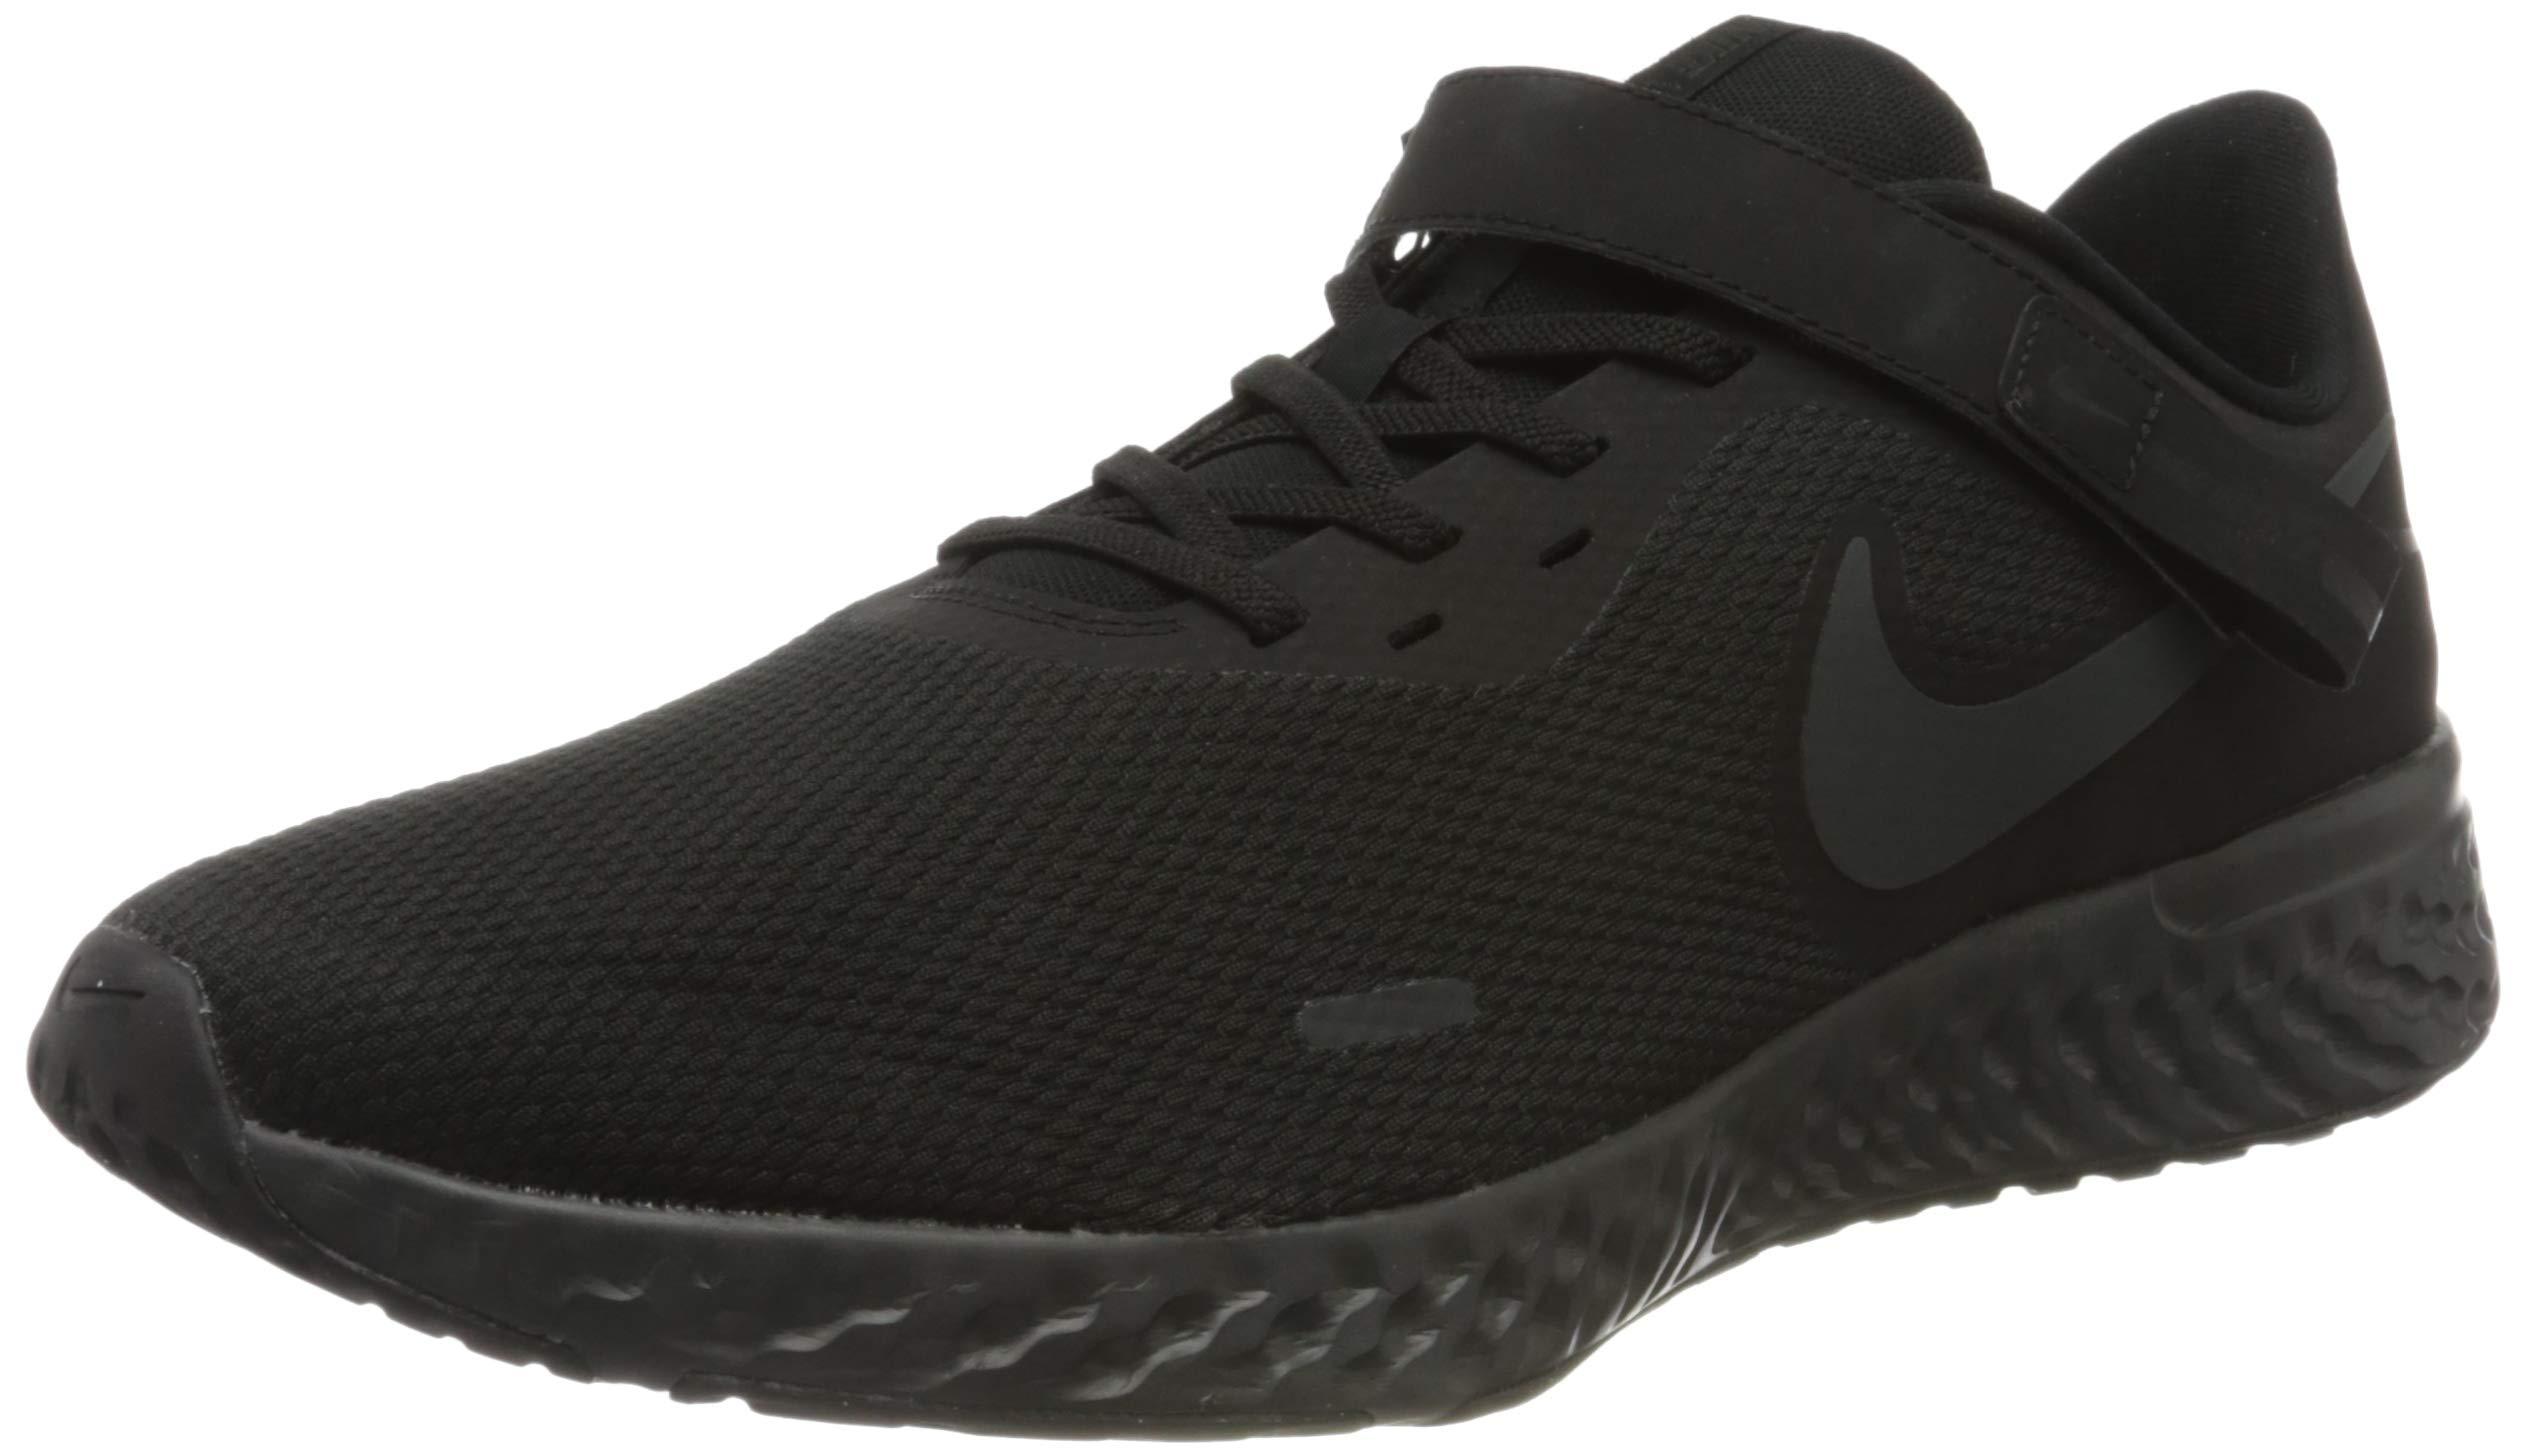 Nike Lace Revolution 5 Flyease Running Shoe in Black White Anthracite  (Black) for Men - Save 65% - Lyst